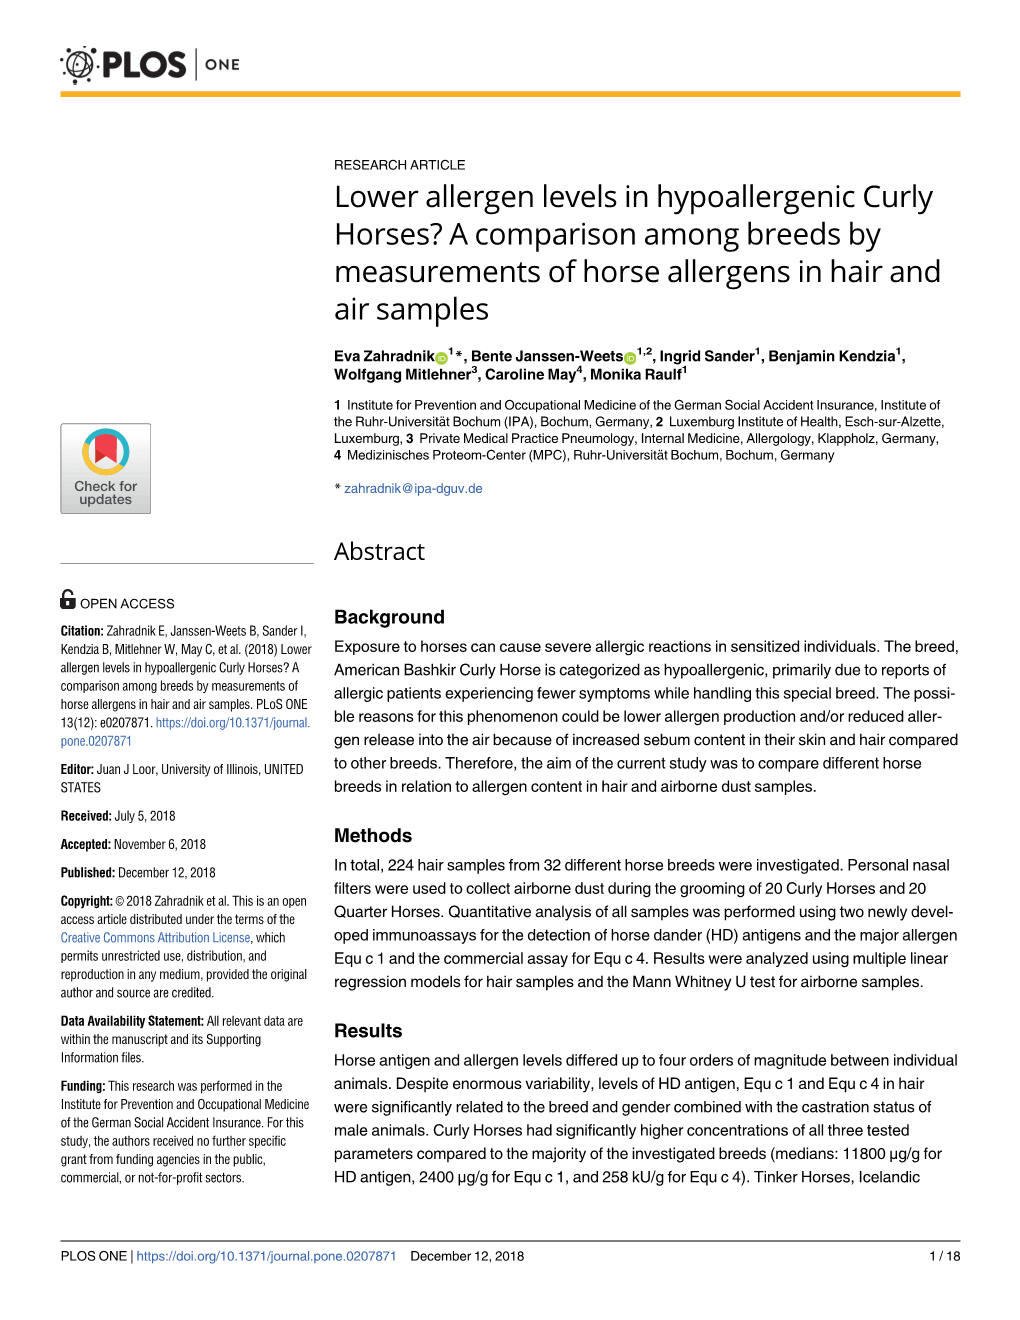 Lower Allergen Levels in Hypoallergenic Curly Horses? a Comparison Among Breeds by Measurements of Horse Allergens in Hair and Air Samples